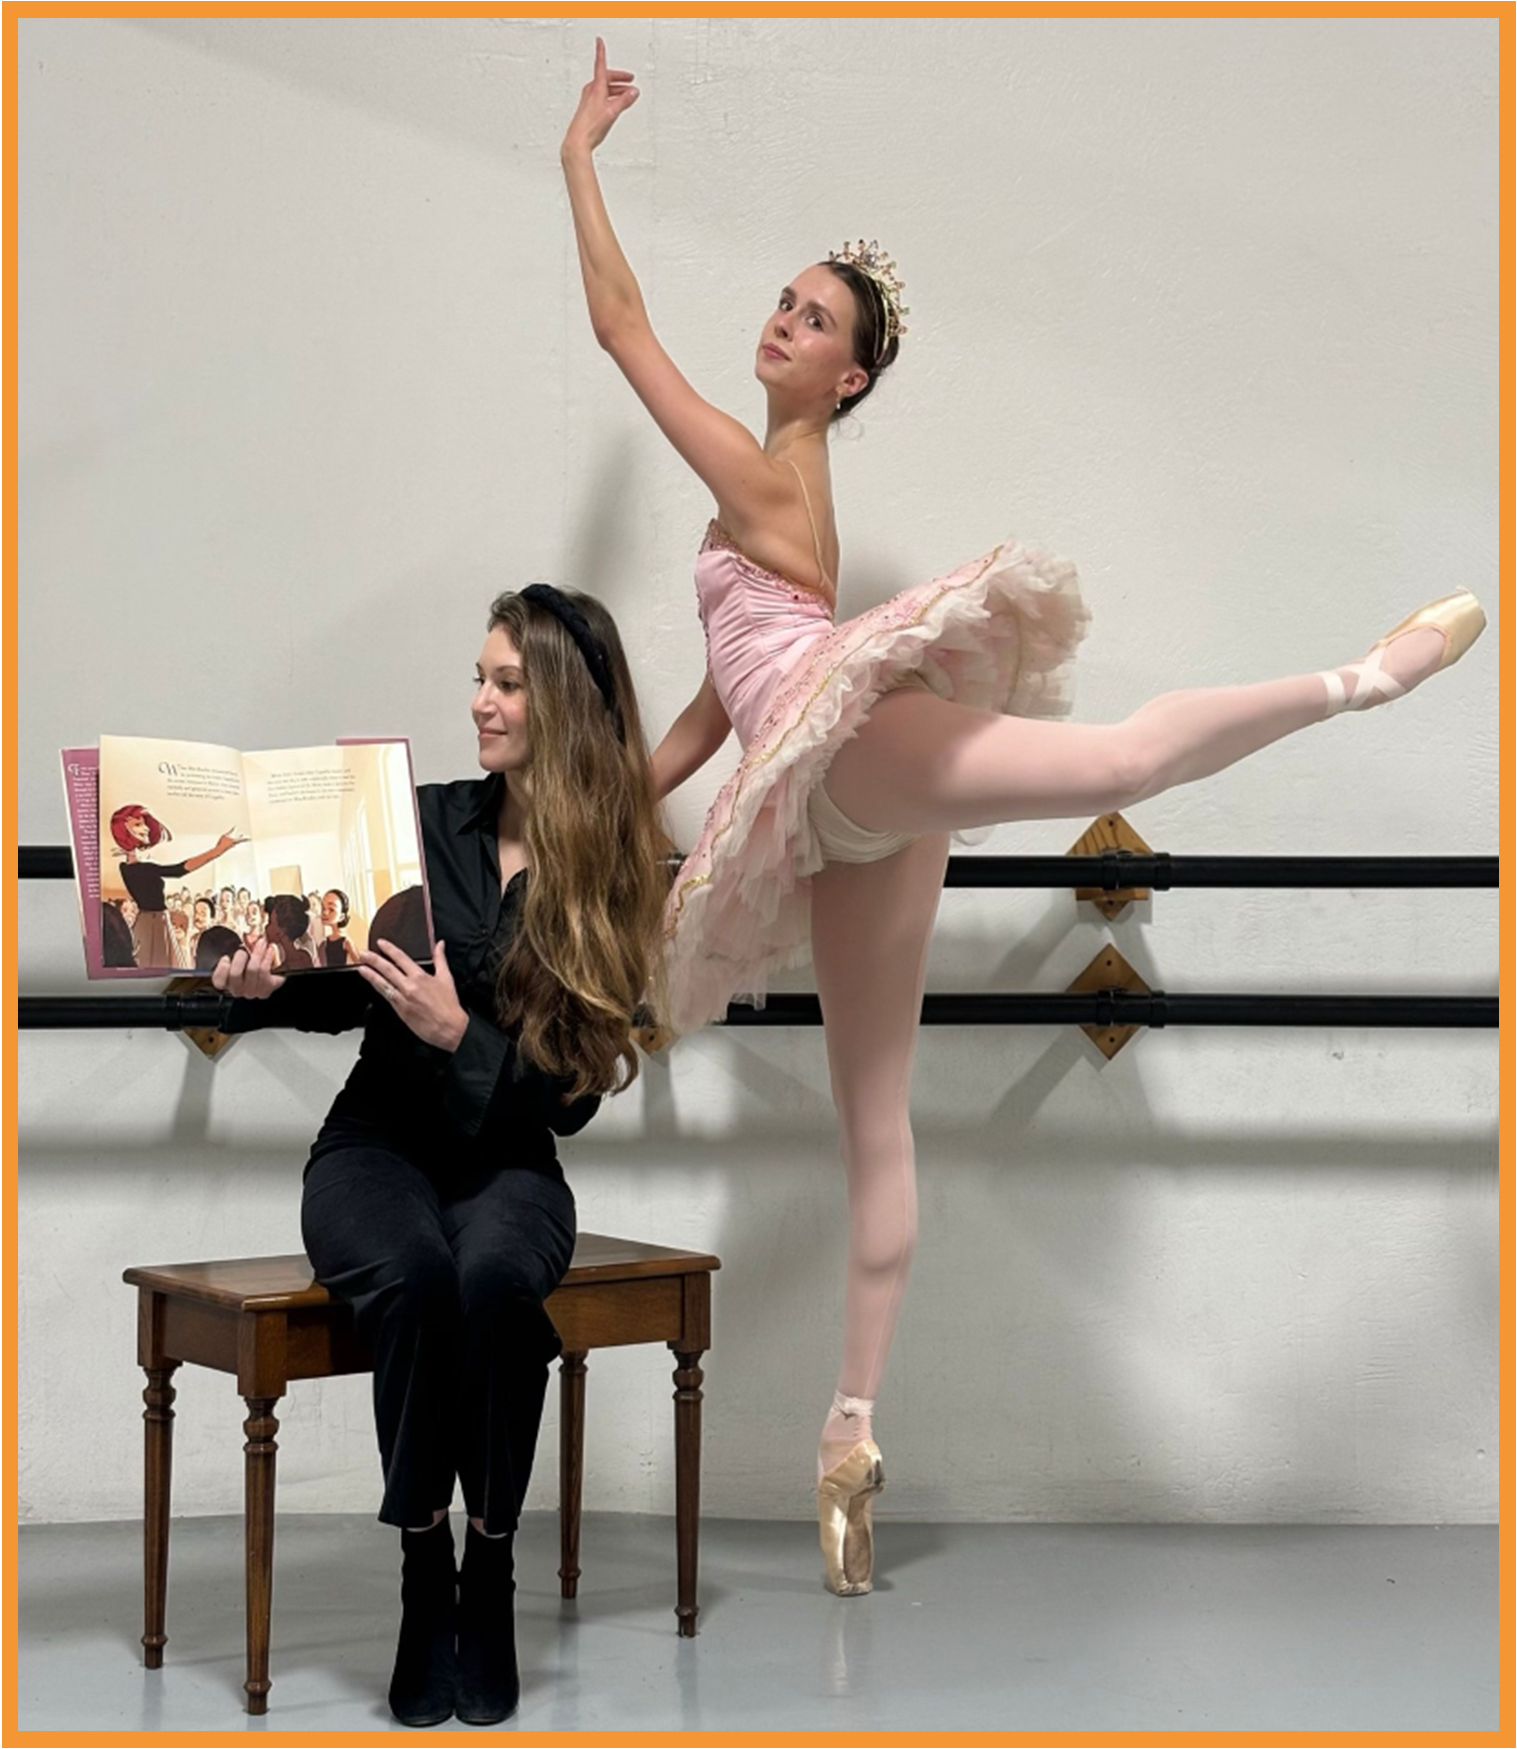 A woman reading a book with a ballet dancer in the background